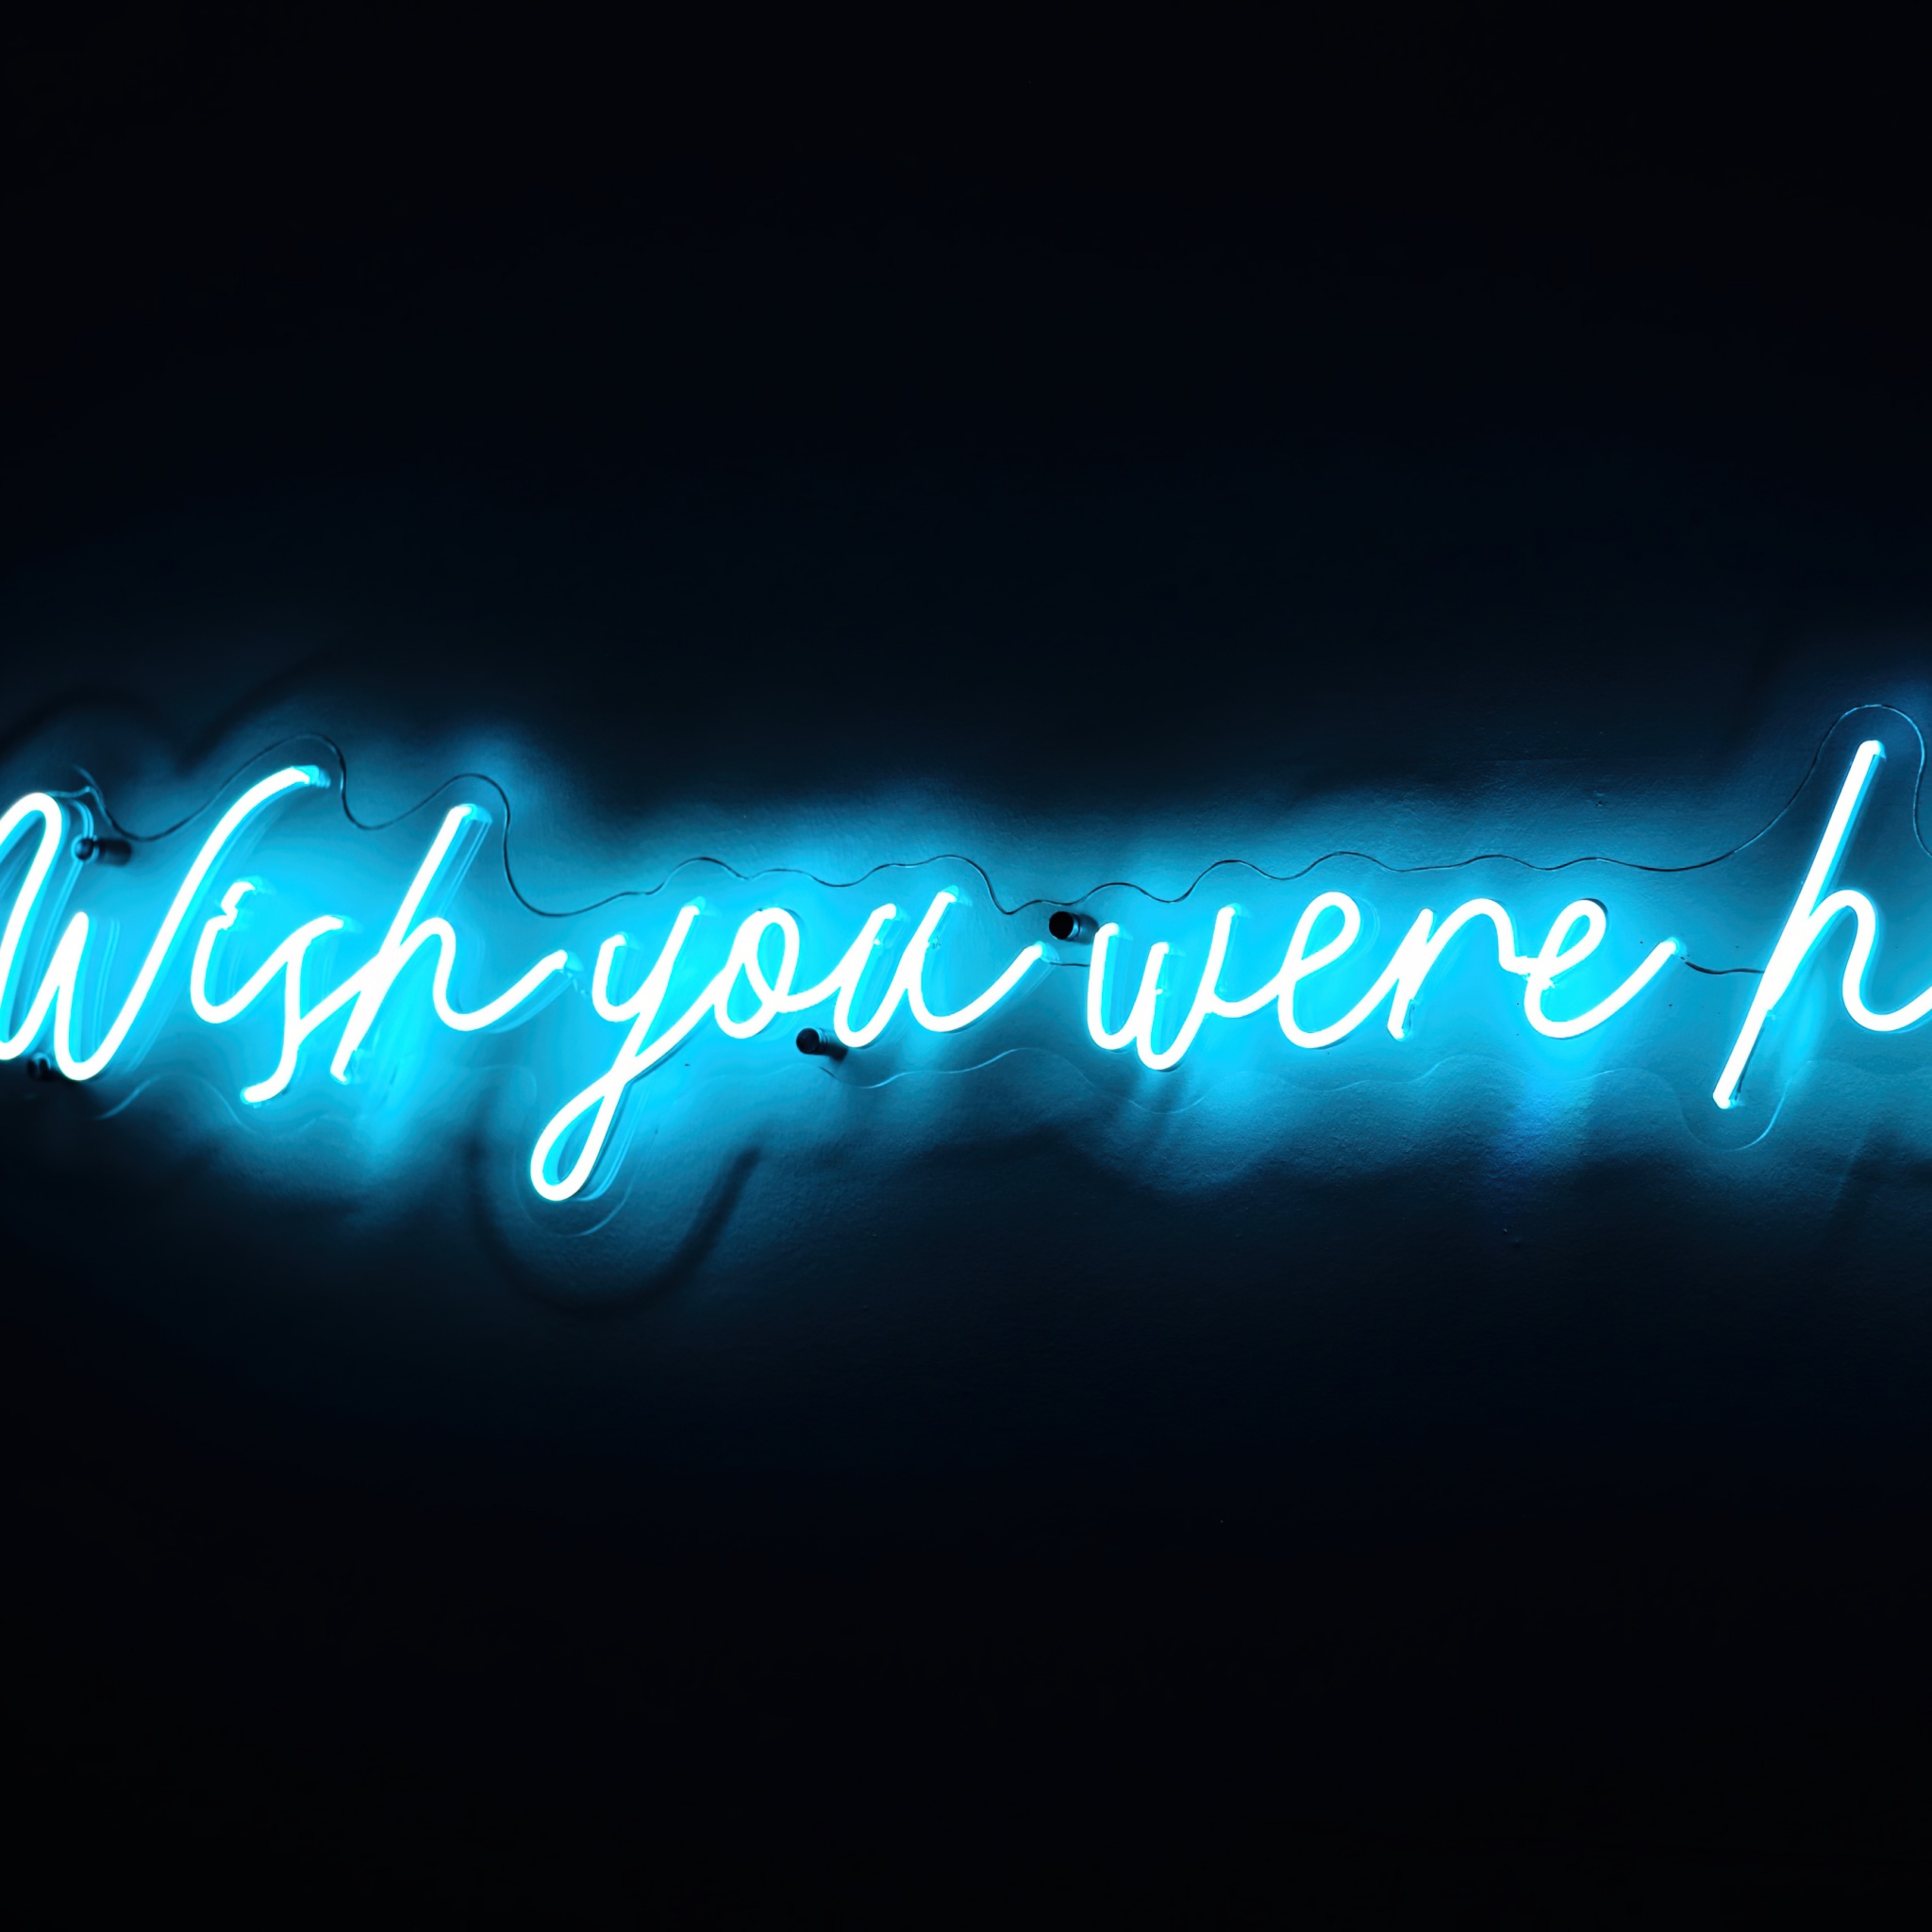 Free download Pink Floyd Wallpaper 1024x768 Pink Floyd Wish You Were Here  1024x768 for your Desktop Mobile  Tablet  Explore 46 Free Pink Floyd  Wallpapers  Pink Floyd Backgrounds Pink Floyd